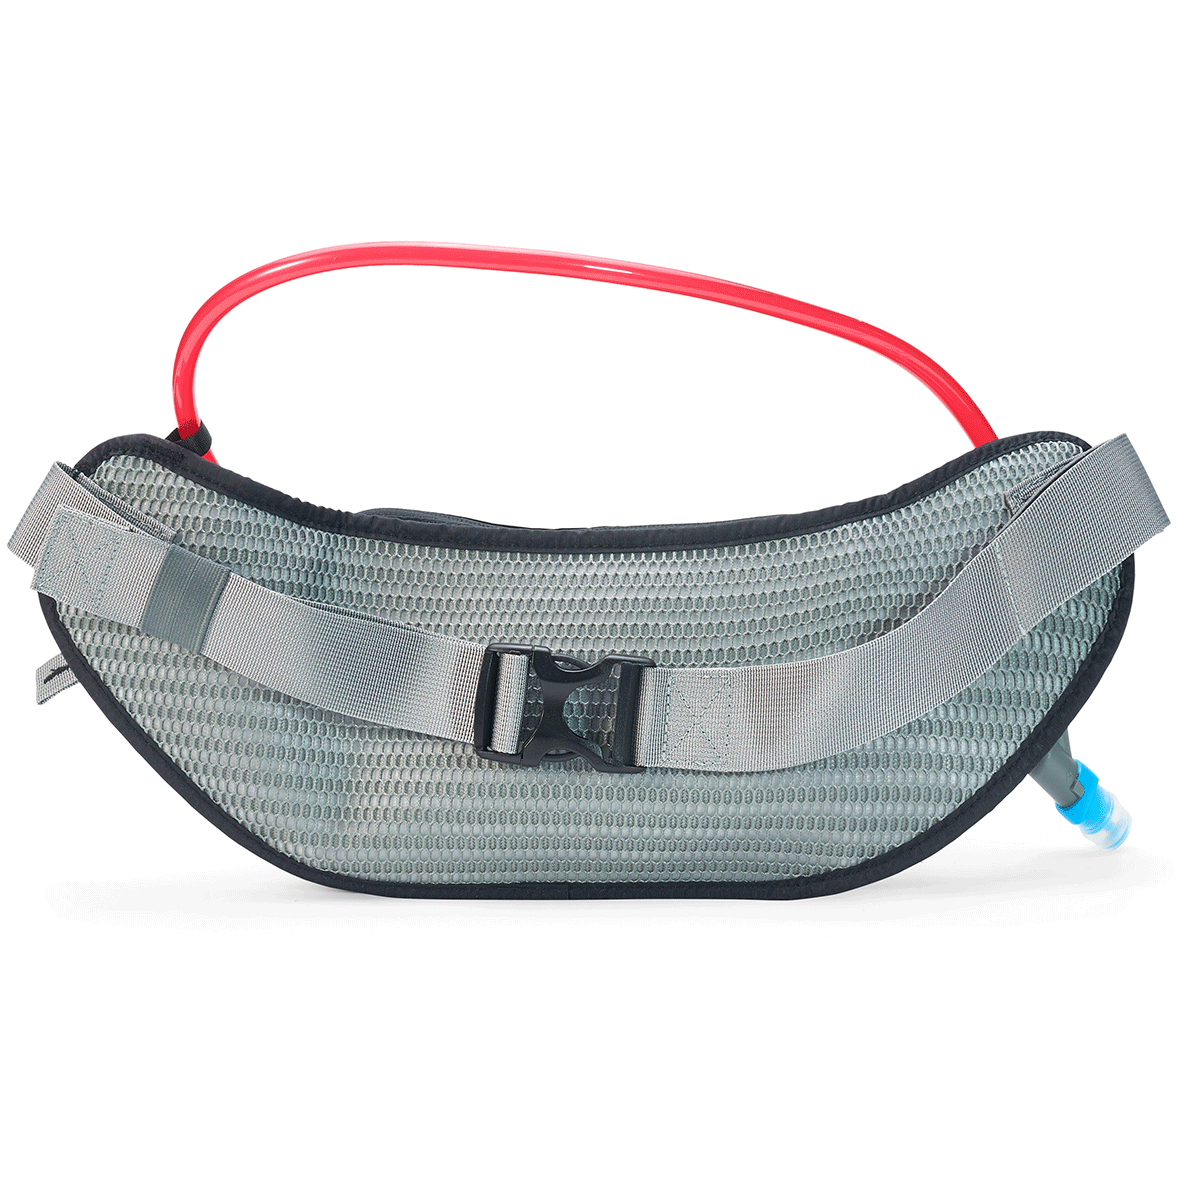 USWE ZULO 2L HYDRATION WAST PACK 1L